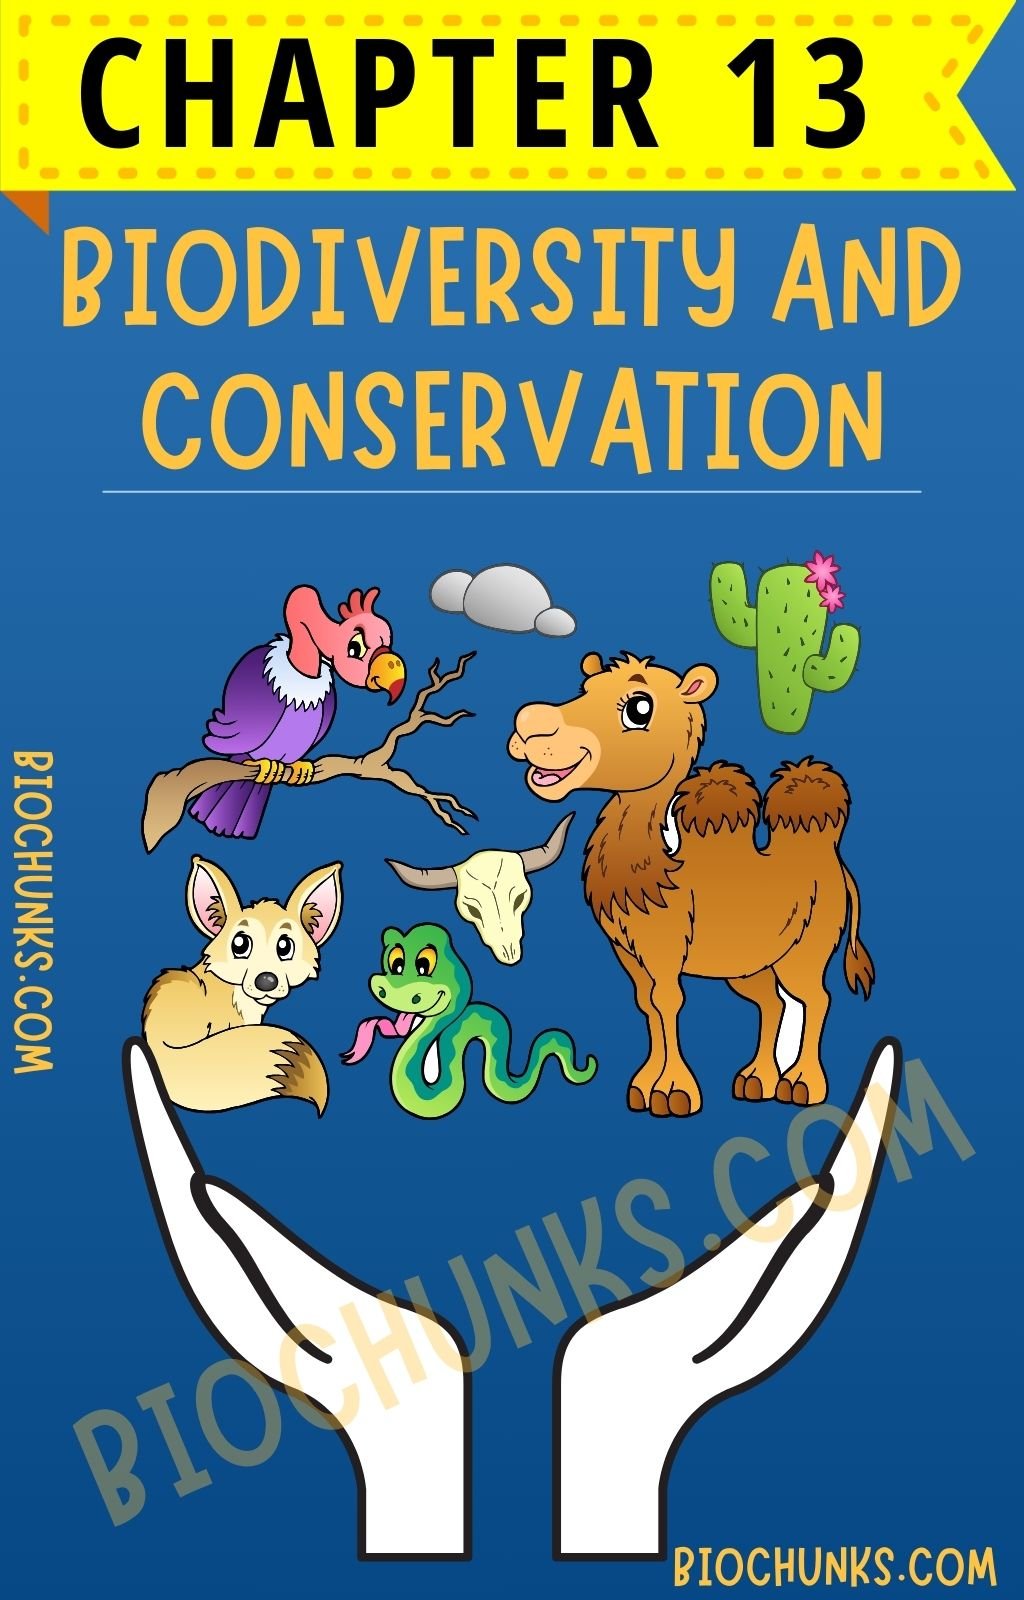 Biodiversity and Conservation Chapter 13 Class 12th biochunks.com